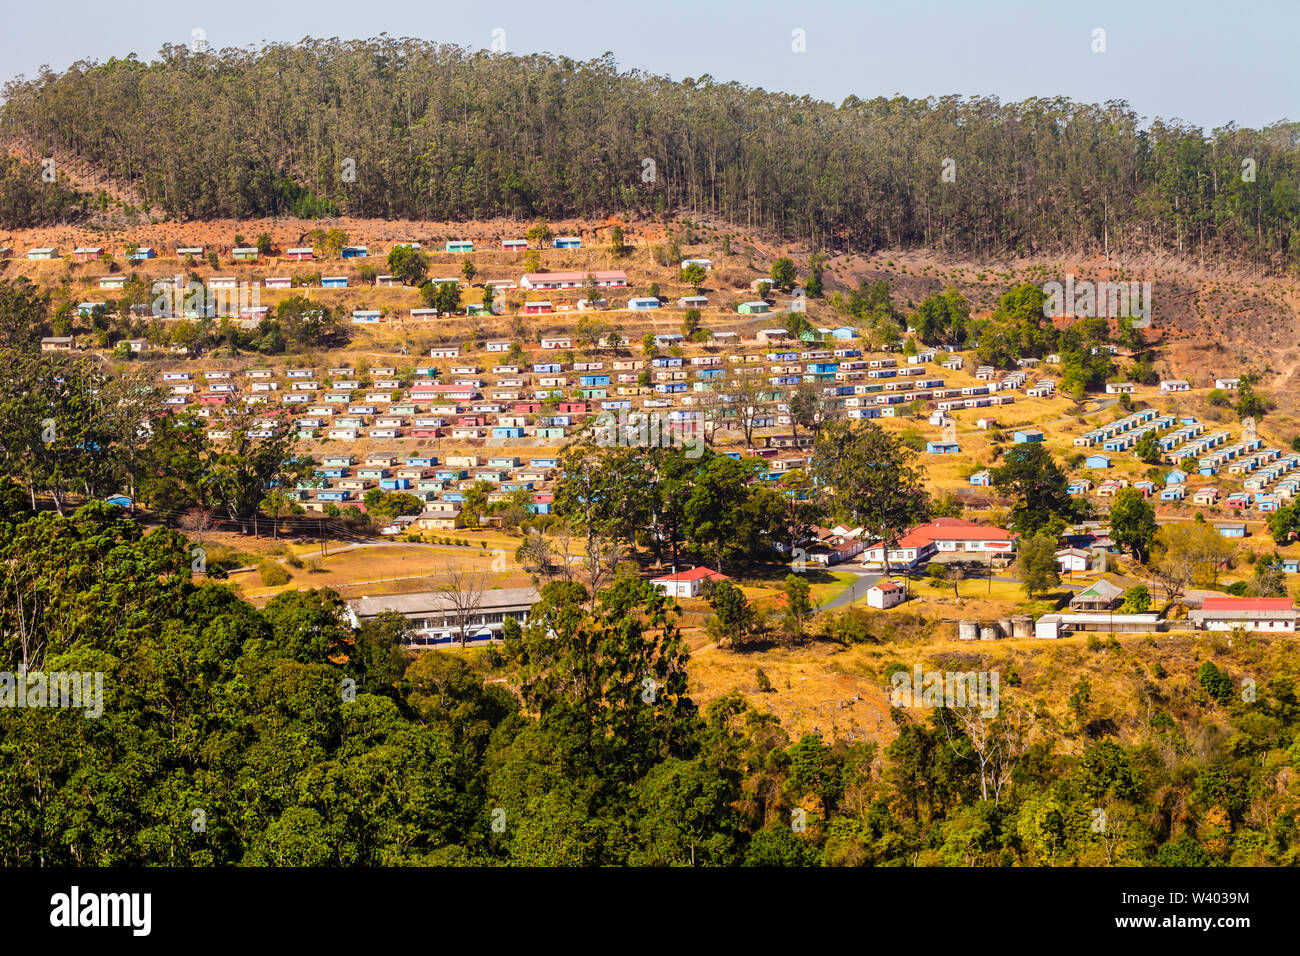 Panoramic view of typical village with colorful houses arranged in geometric manner, Swaziland, South Africa Stock Photo